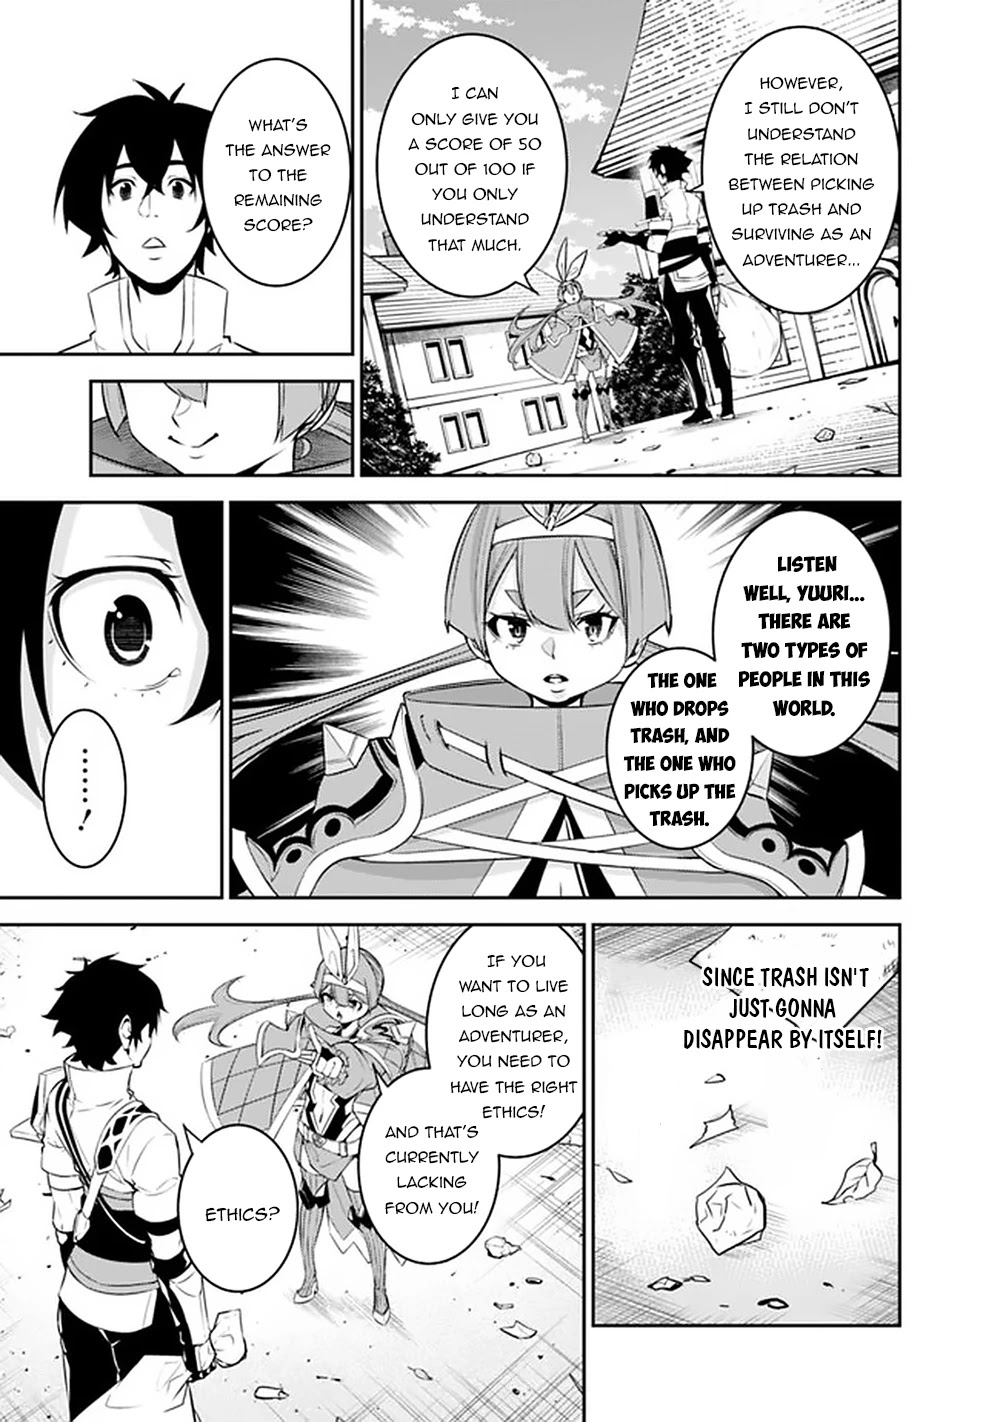 The Strongest Magical Swordsman Ever Reborn As An F-Rank Adventurer. - Page 6